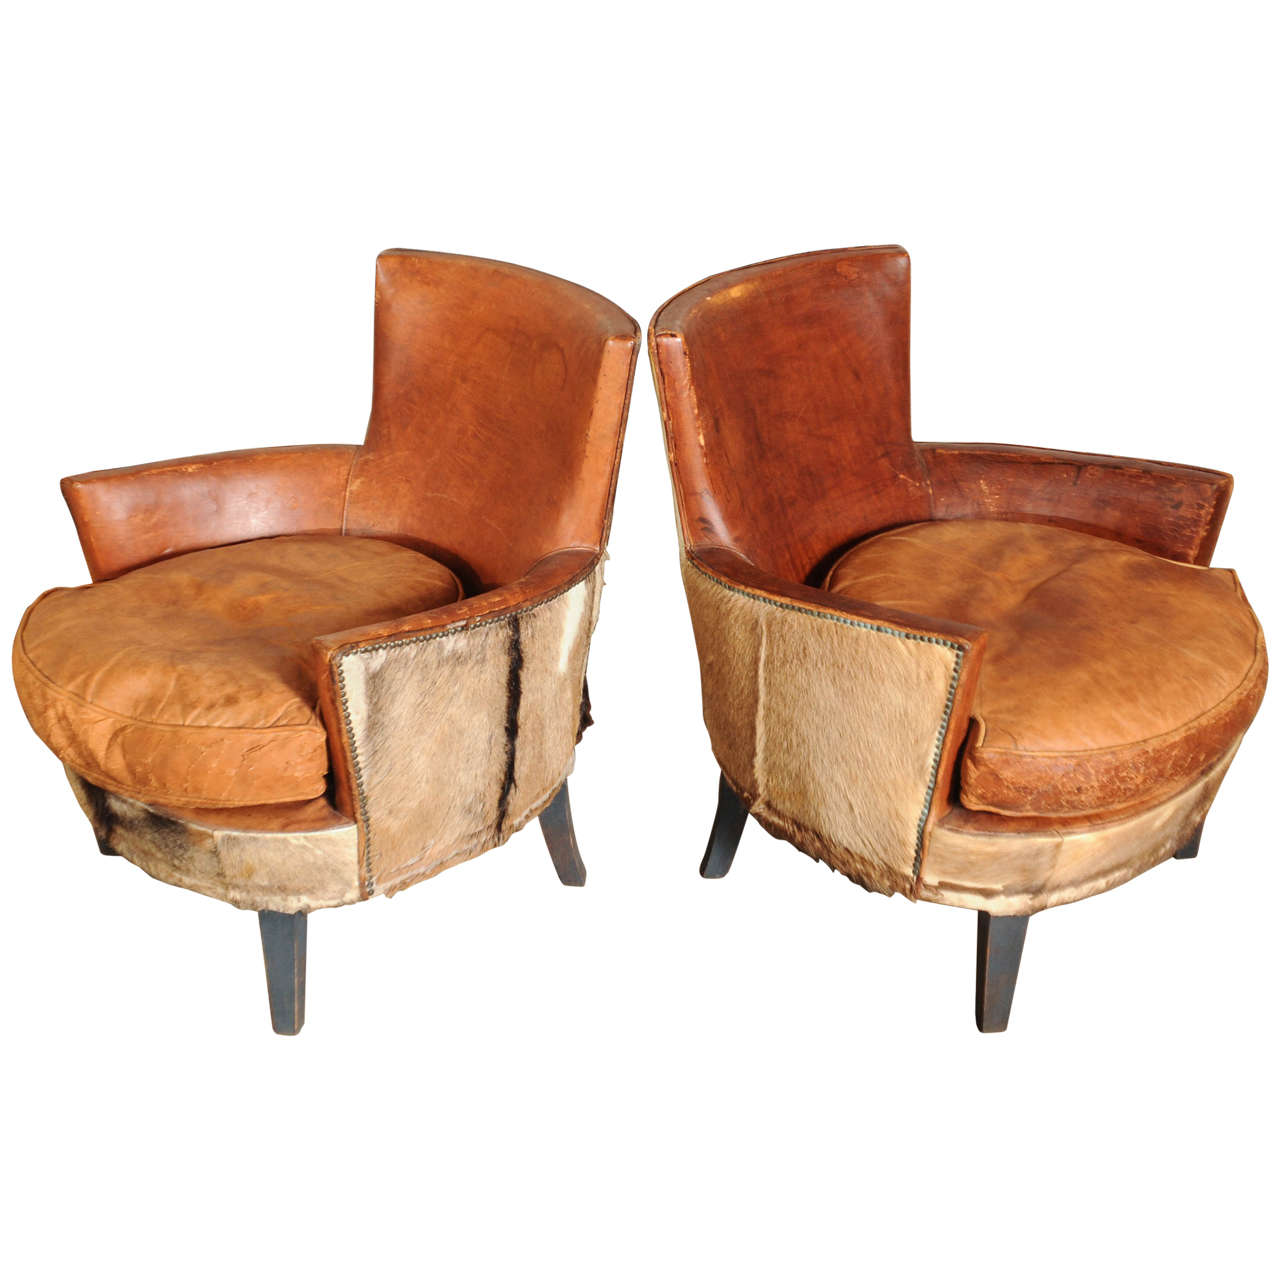 Pair of 1910s-1920s Boar Skin Armchairs